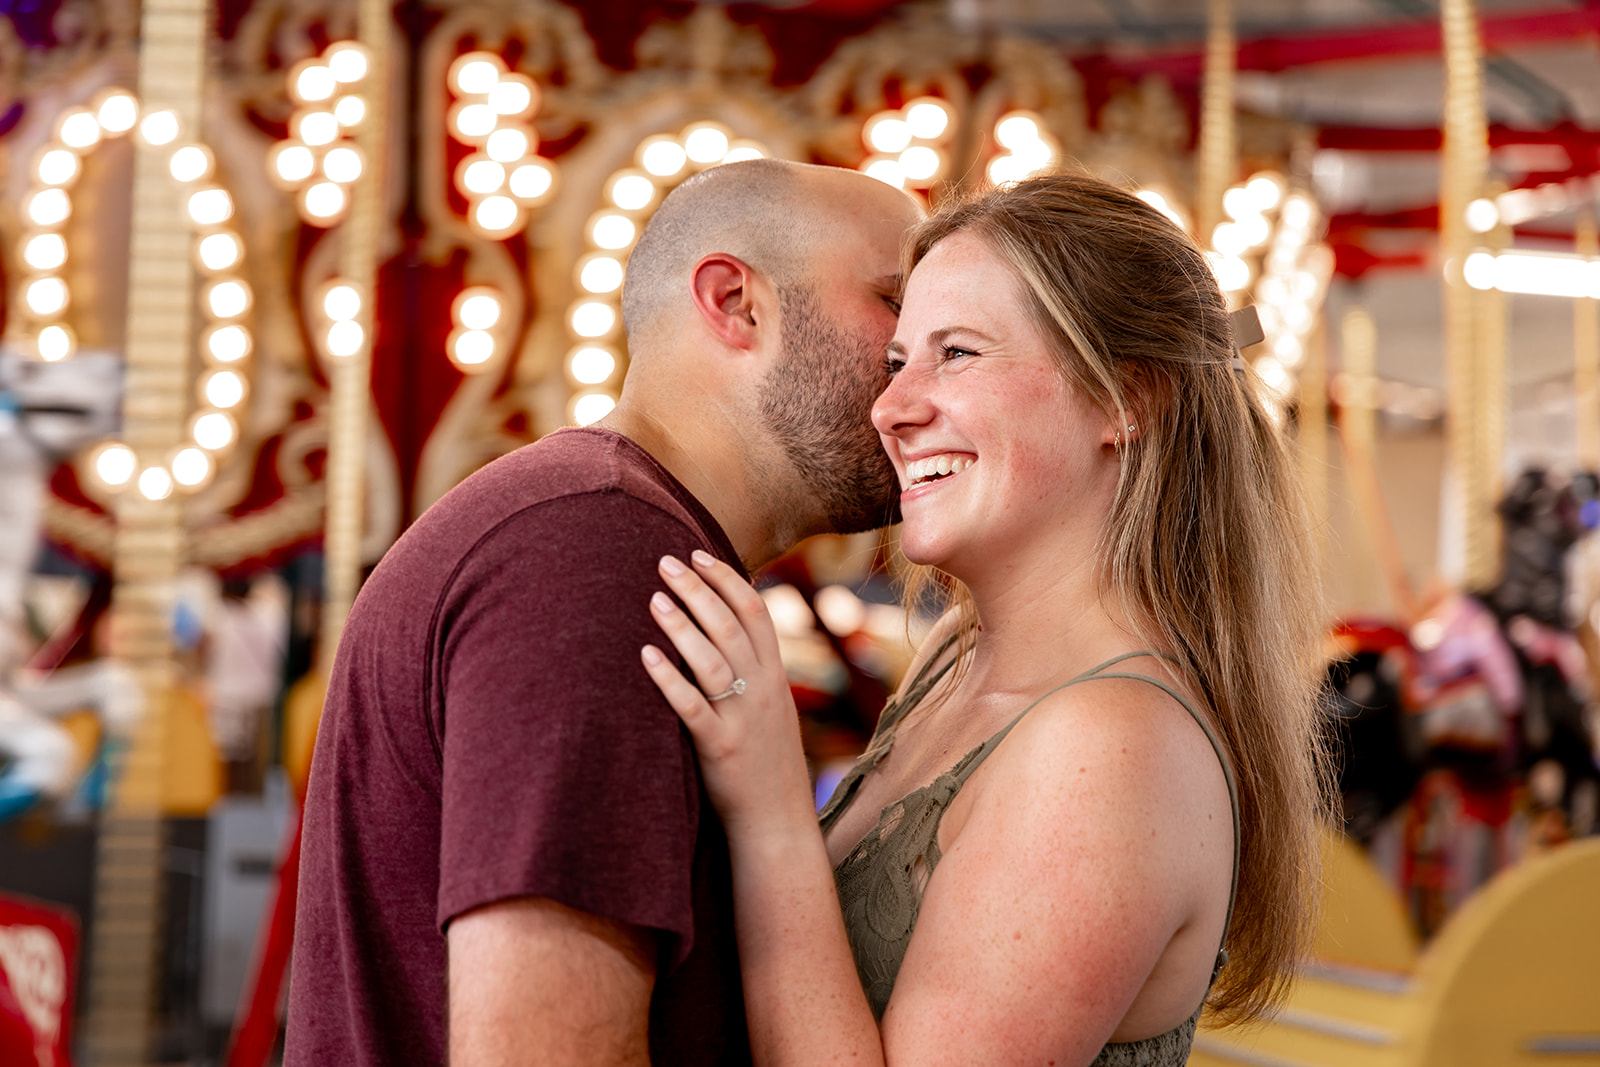 engagement photos in front of a carousel at the boardwalk arcade Funland in Rehoboth Beach, Delaware